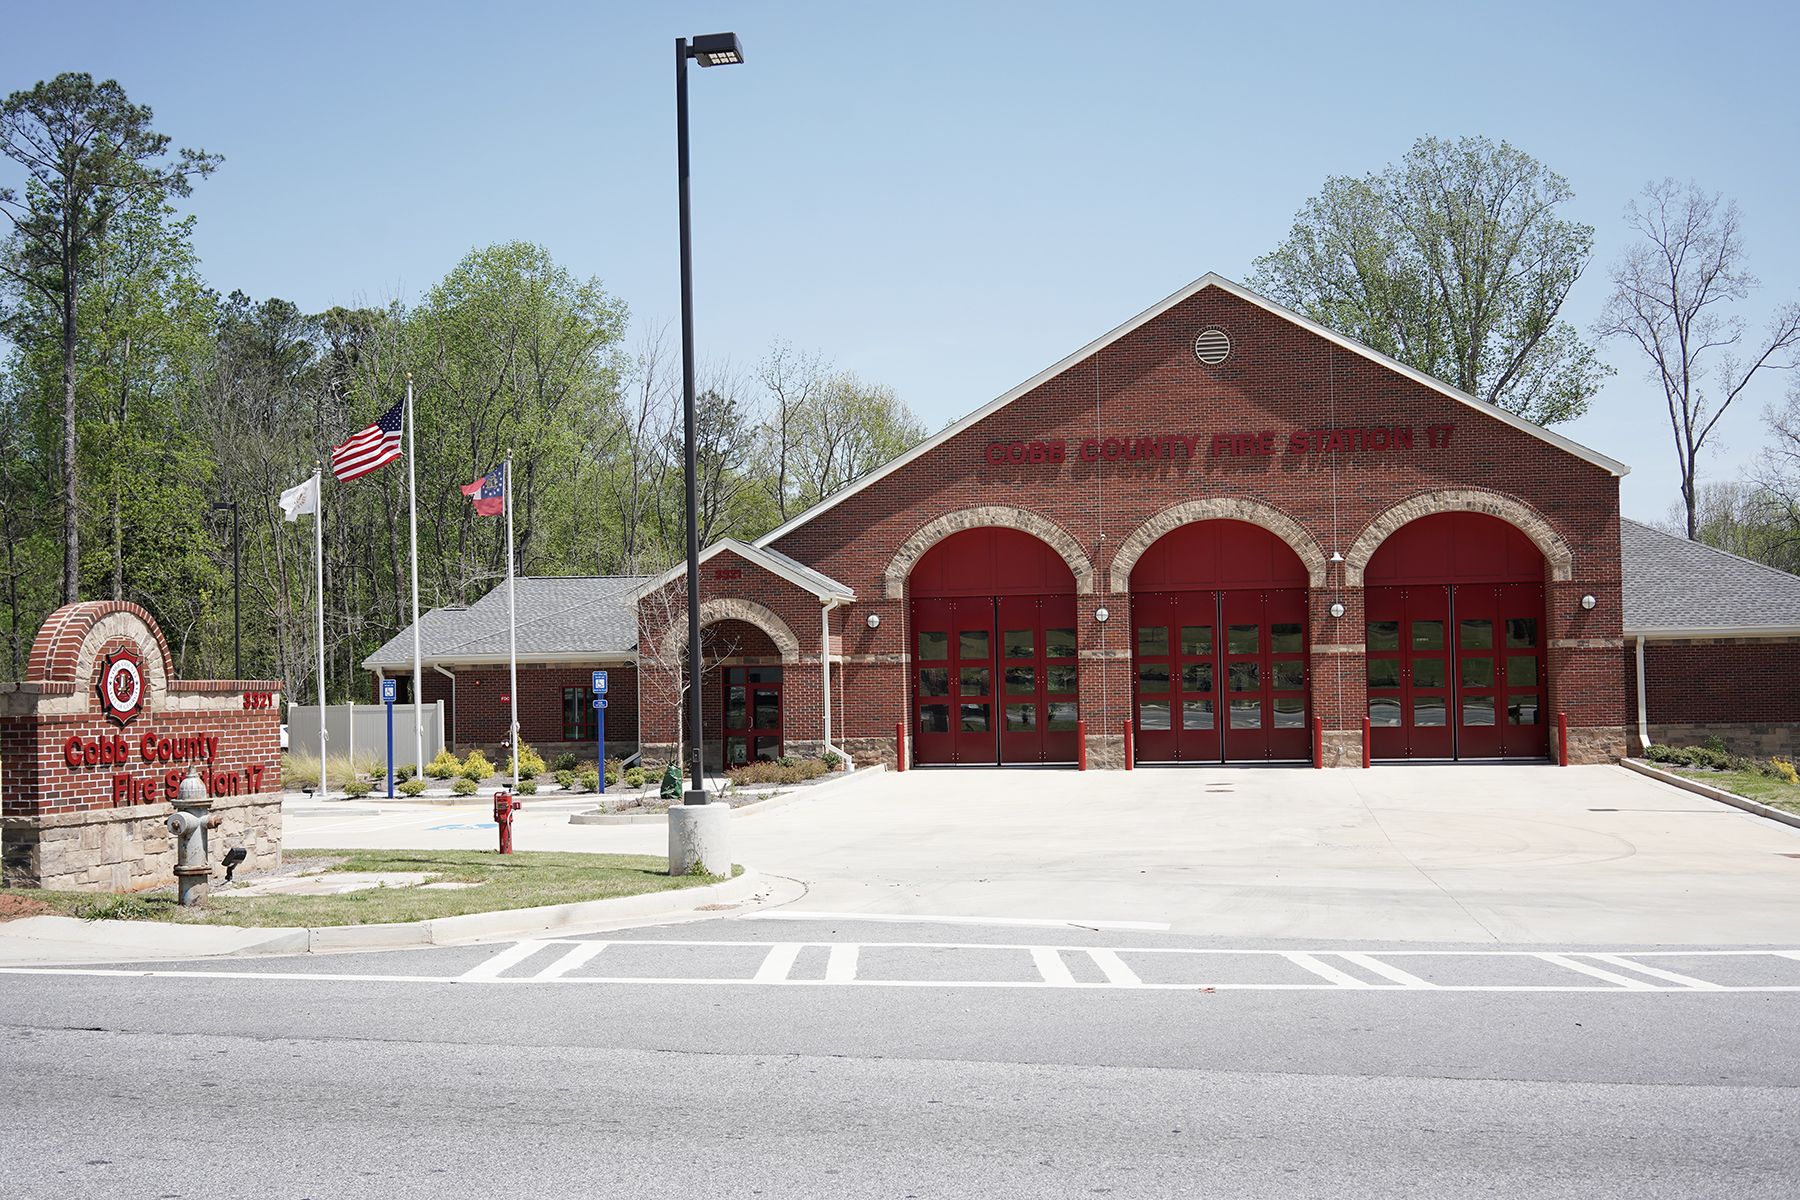 Outside of Fire Station 17